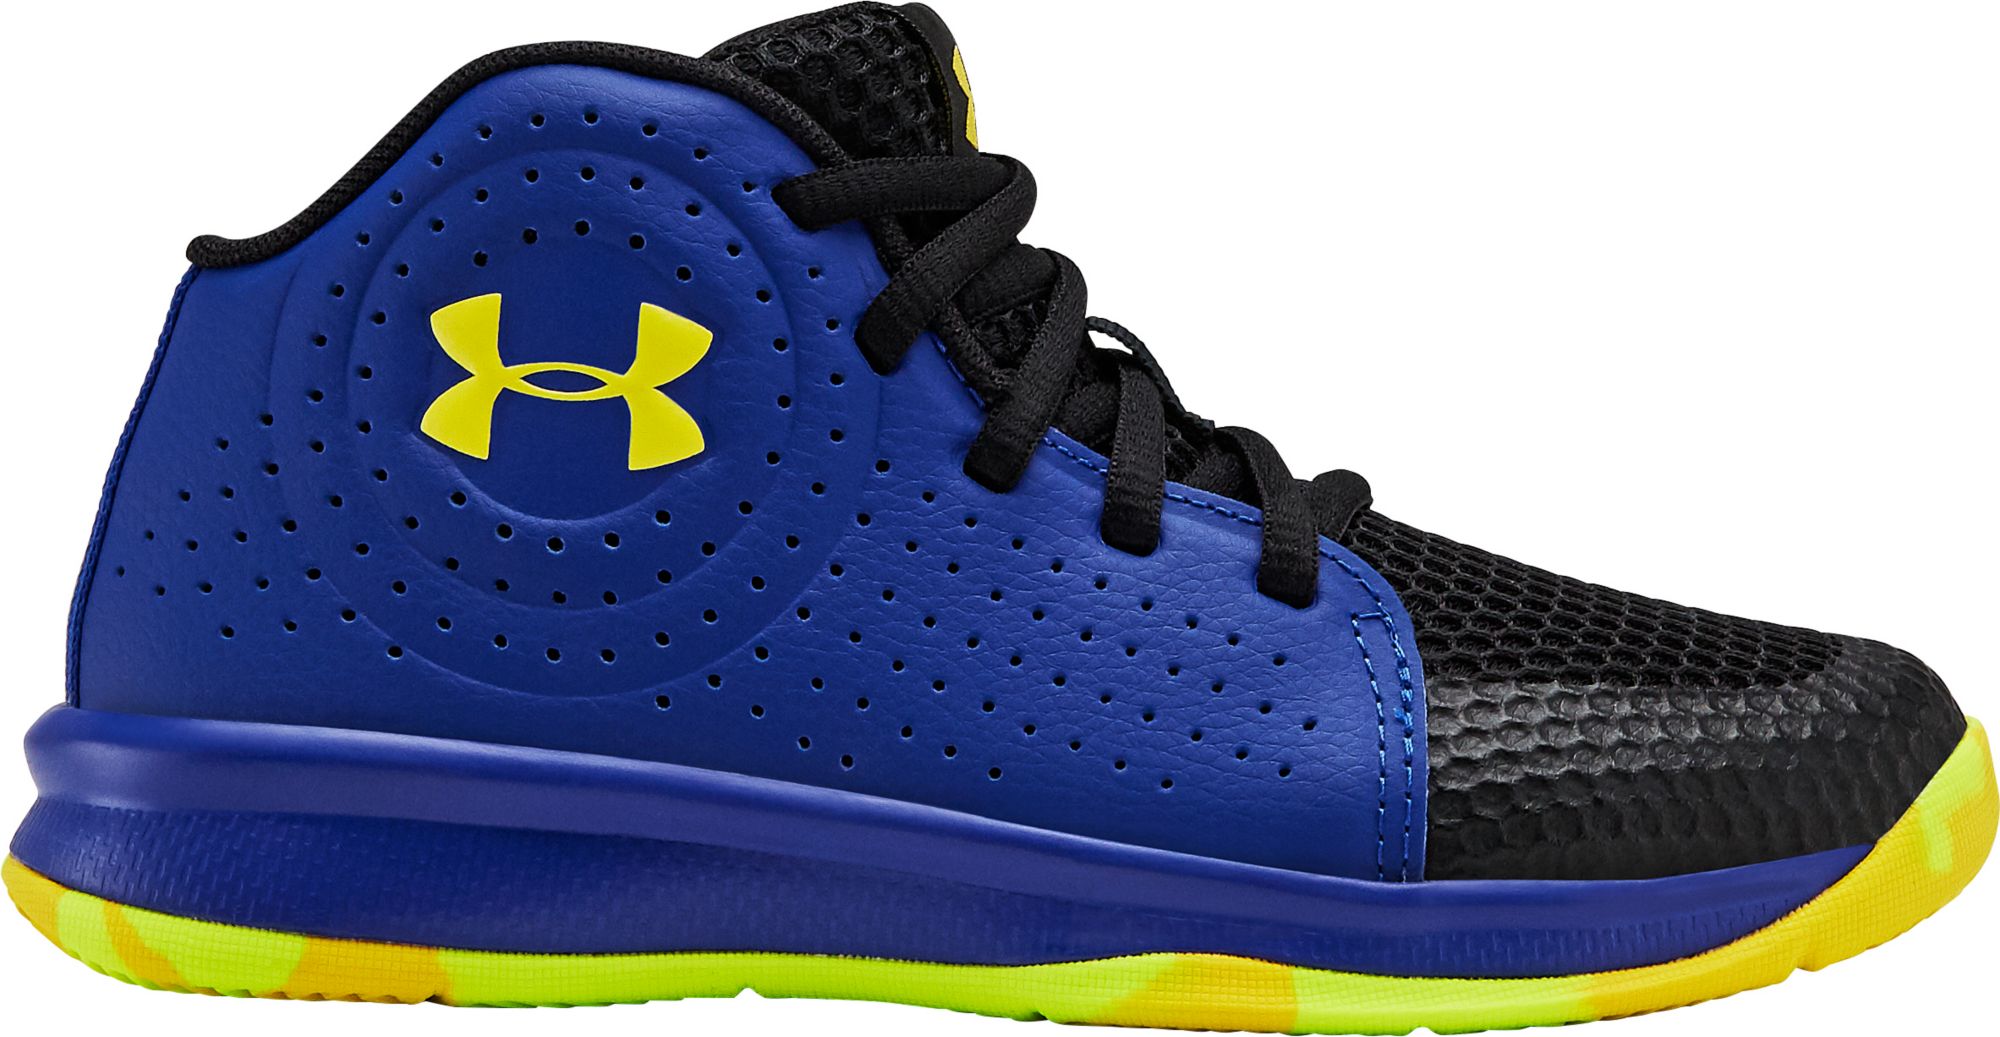 Under Armour Kids' Preschool Jet 2019 Basketball Shoes - image 1 of 6